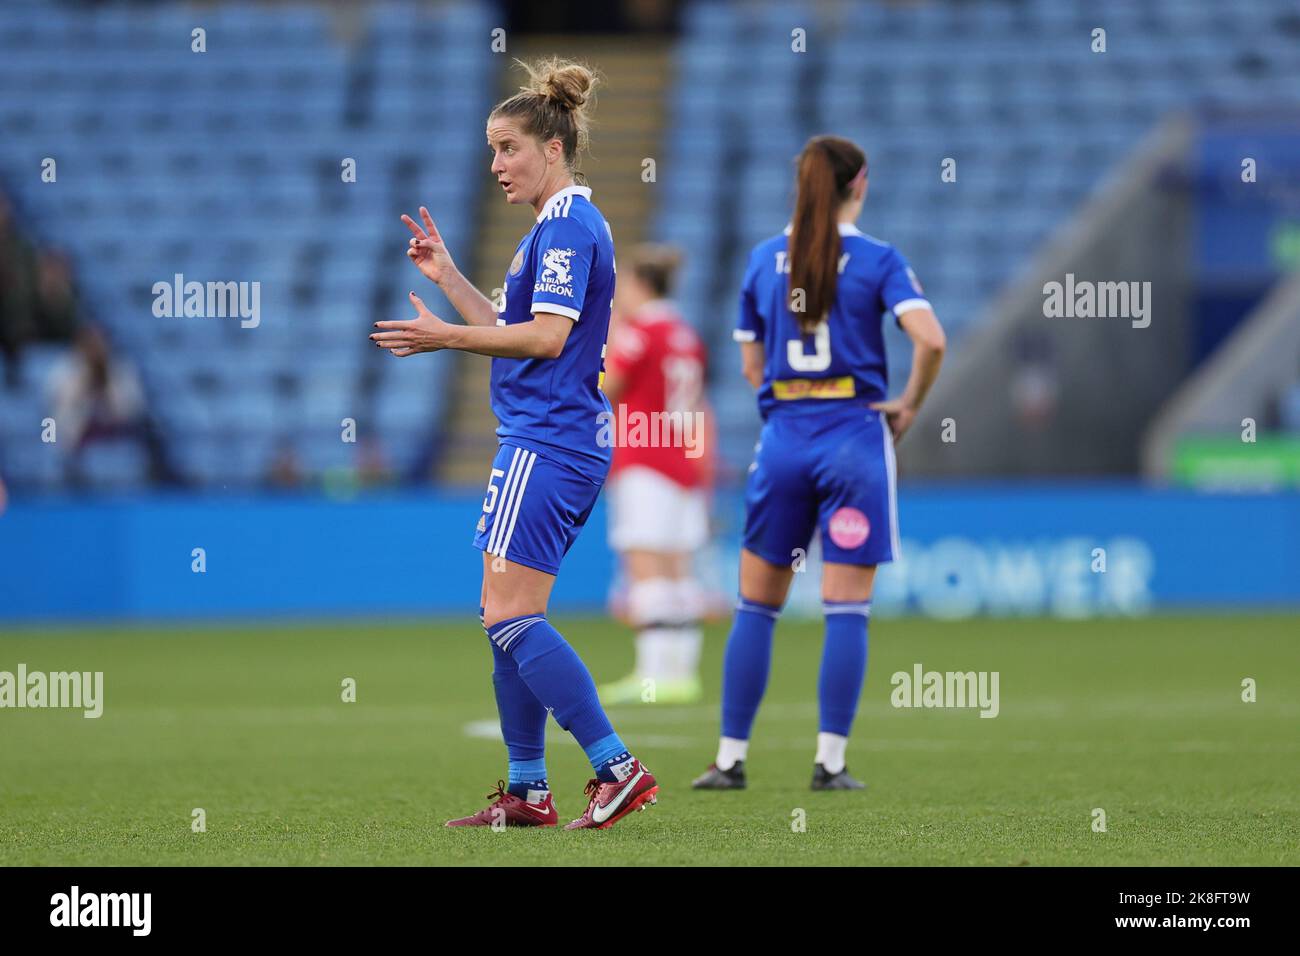 Leicester, UK. 23rd Oct, 2022. Leicester, England, October 23rd 2022: Sophie Howard (15 Leicester City) reacts during the Barclays FA Womens Super League game between Leicester City and Manchester United at the King Power Stadium in Leicester, England. (James Holyoak/SPP) Credit: SPP Sport Press Photo. /Alamy Live News Stock Photo